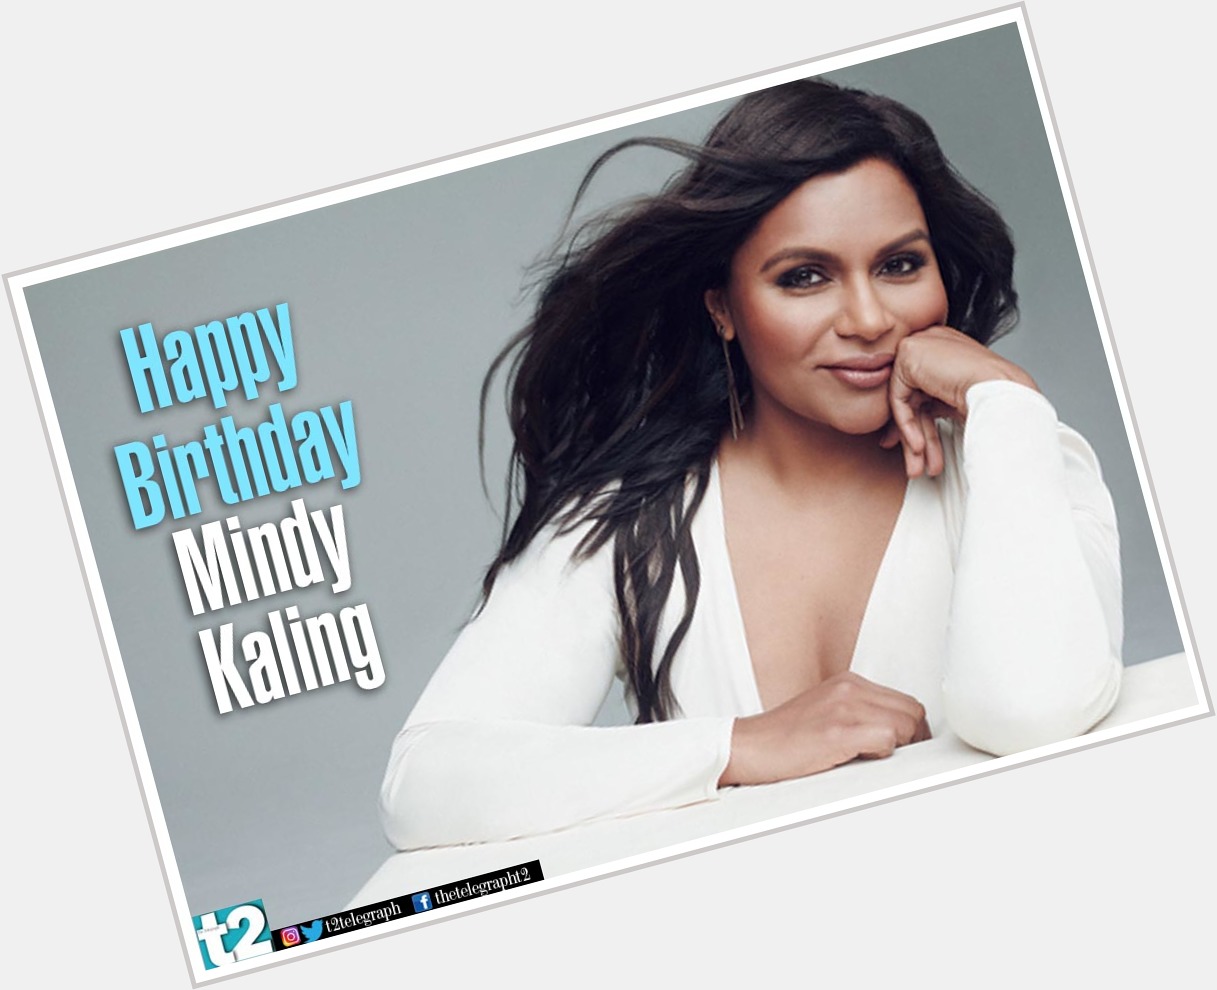 She\s a trooper and a woman we love! t2 wishes Mindy Kaling a very happy birthday! 